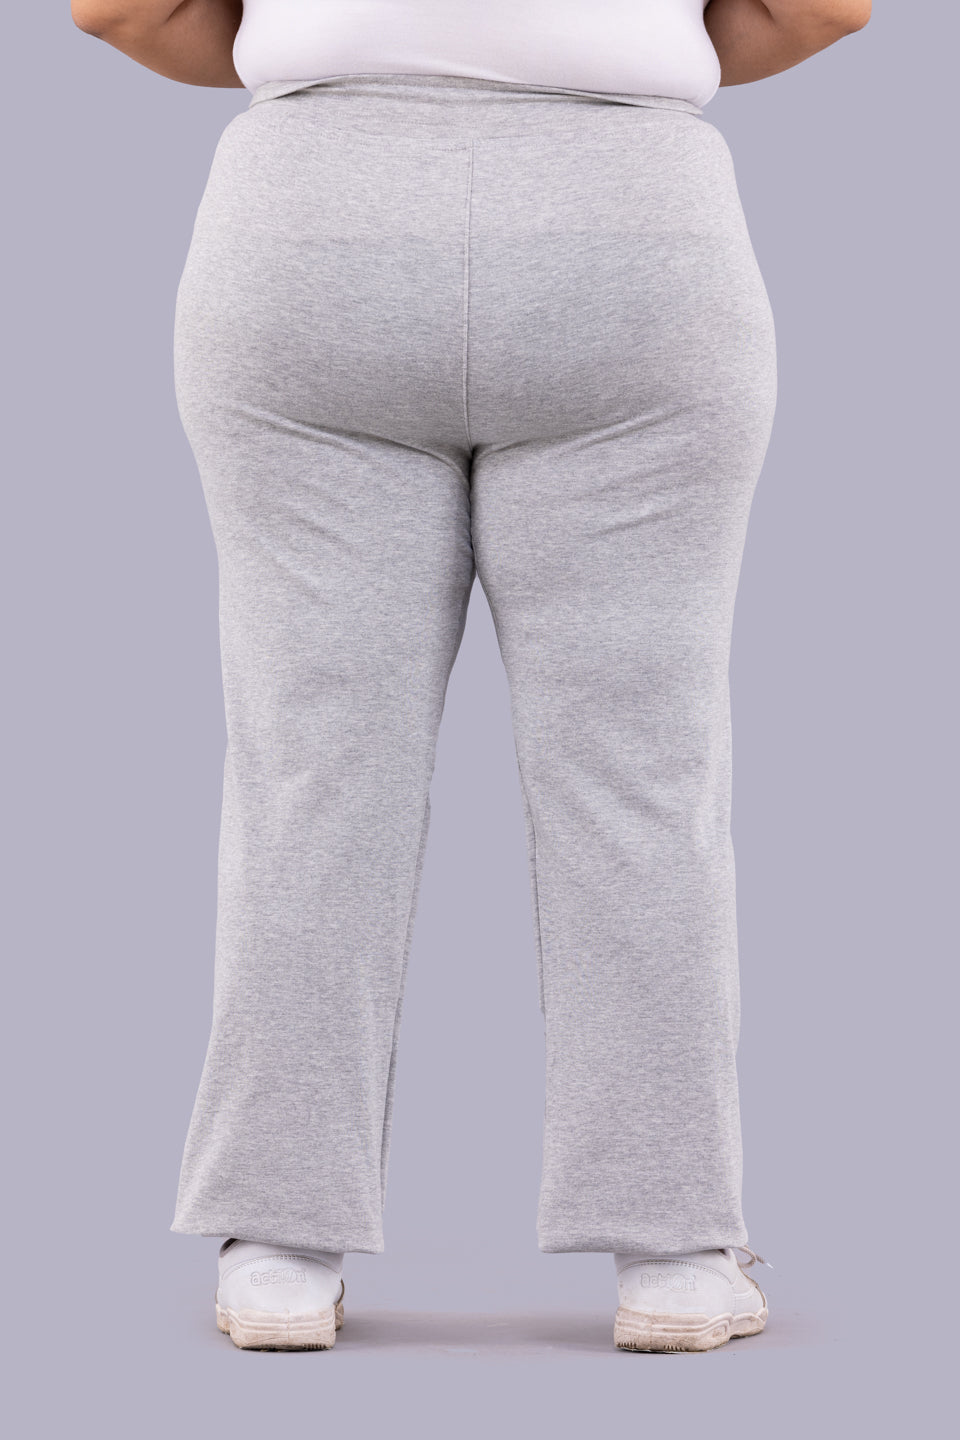 Stylish Cotton Lycra Trackpants for Women(M to 5XL) online in India